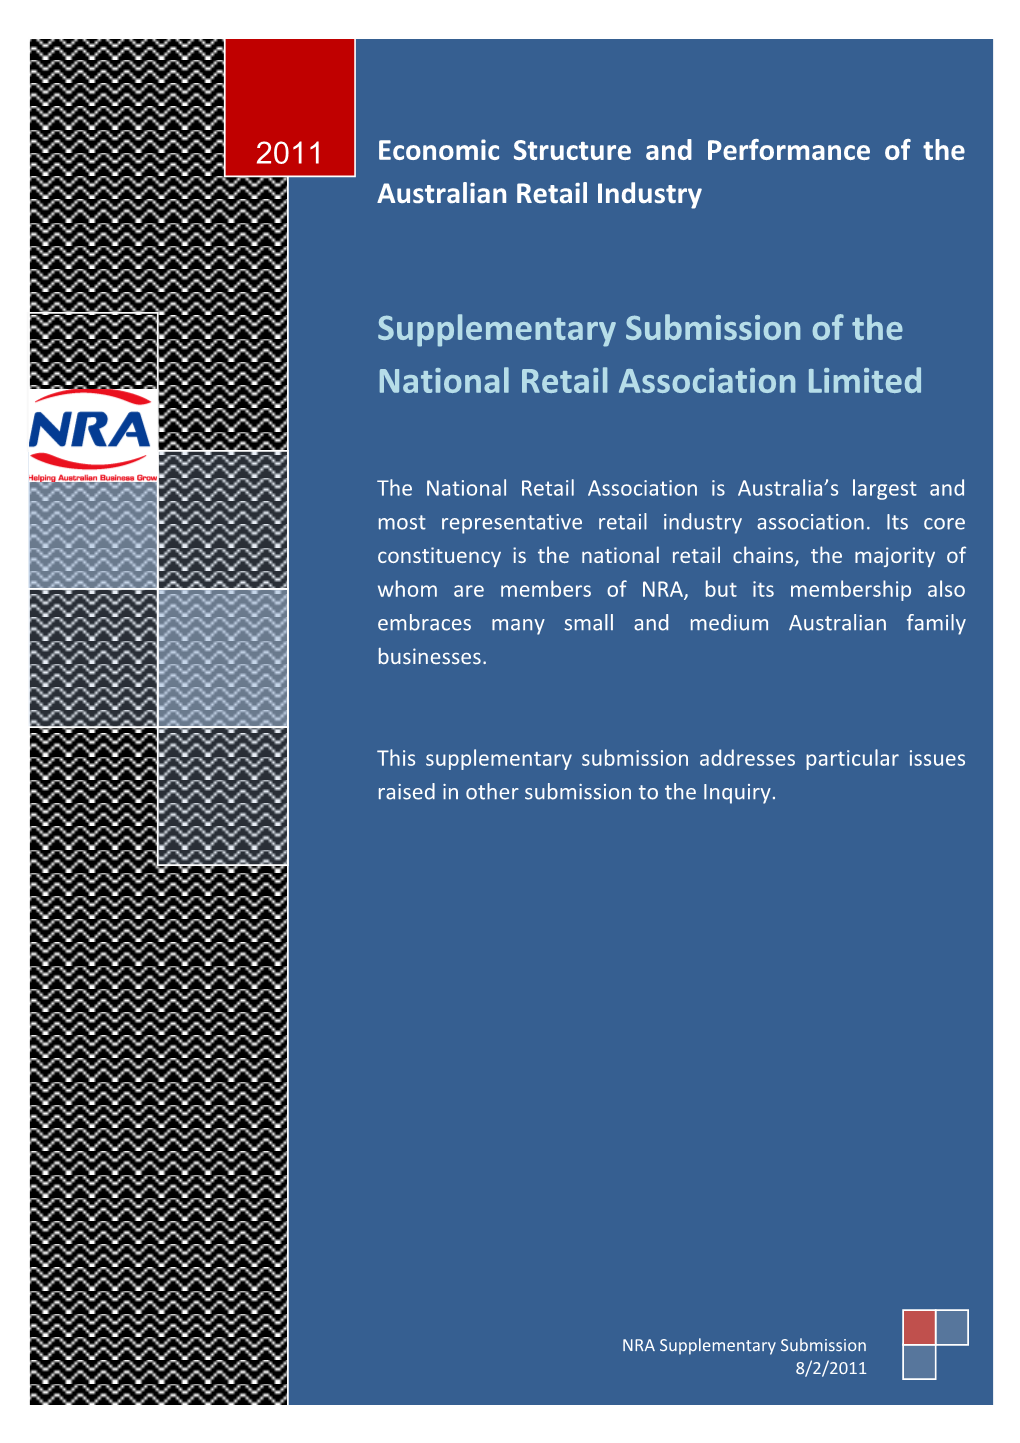 Submission 126 - National Retail Association - Economic Structure and Performance of The